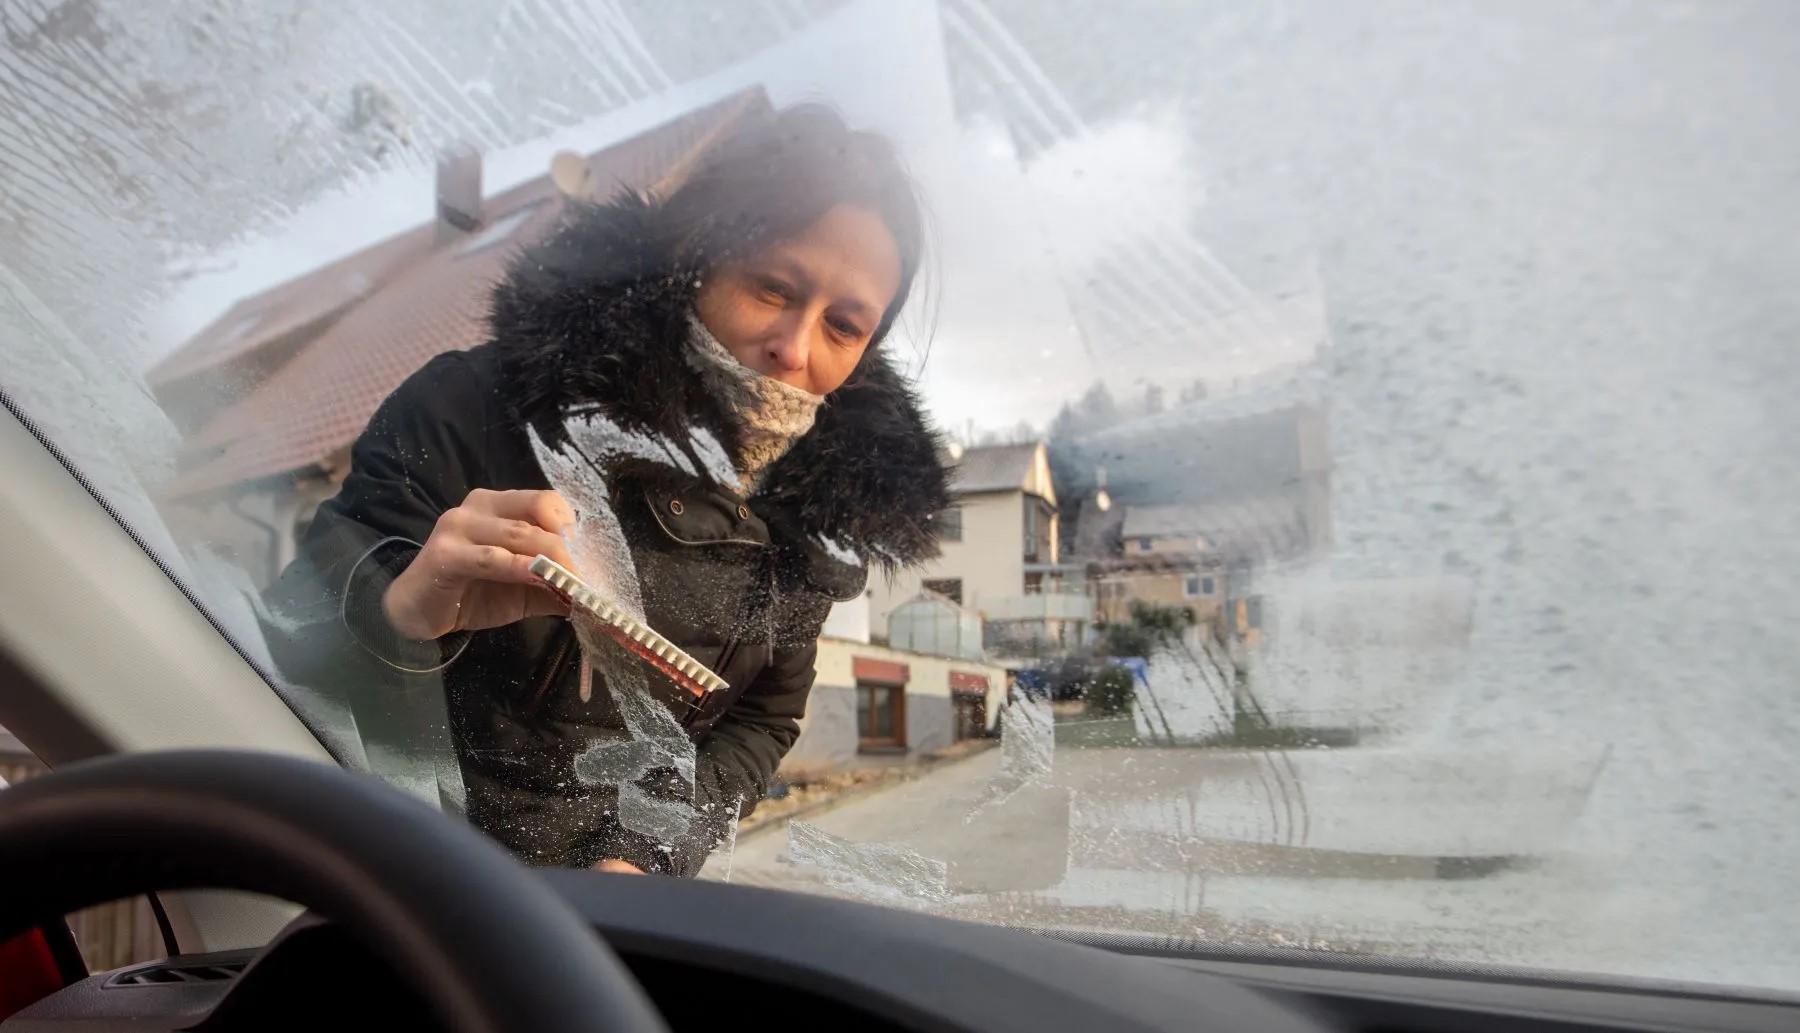 How To Defrost Car Windows Without Heat